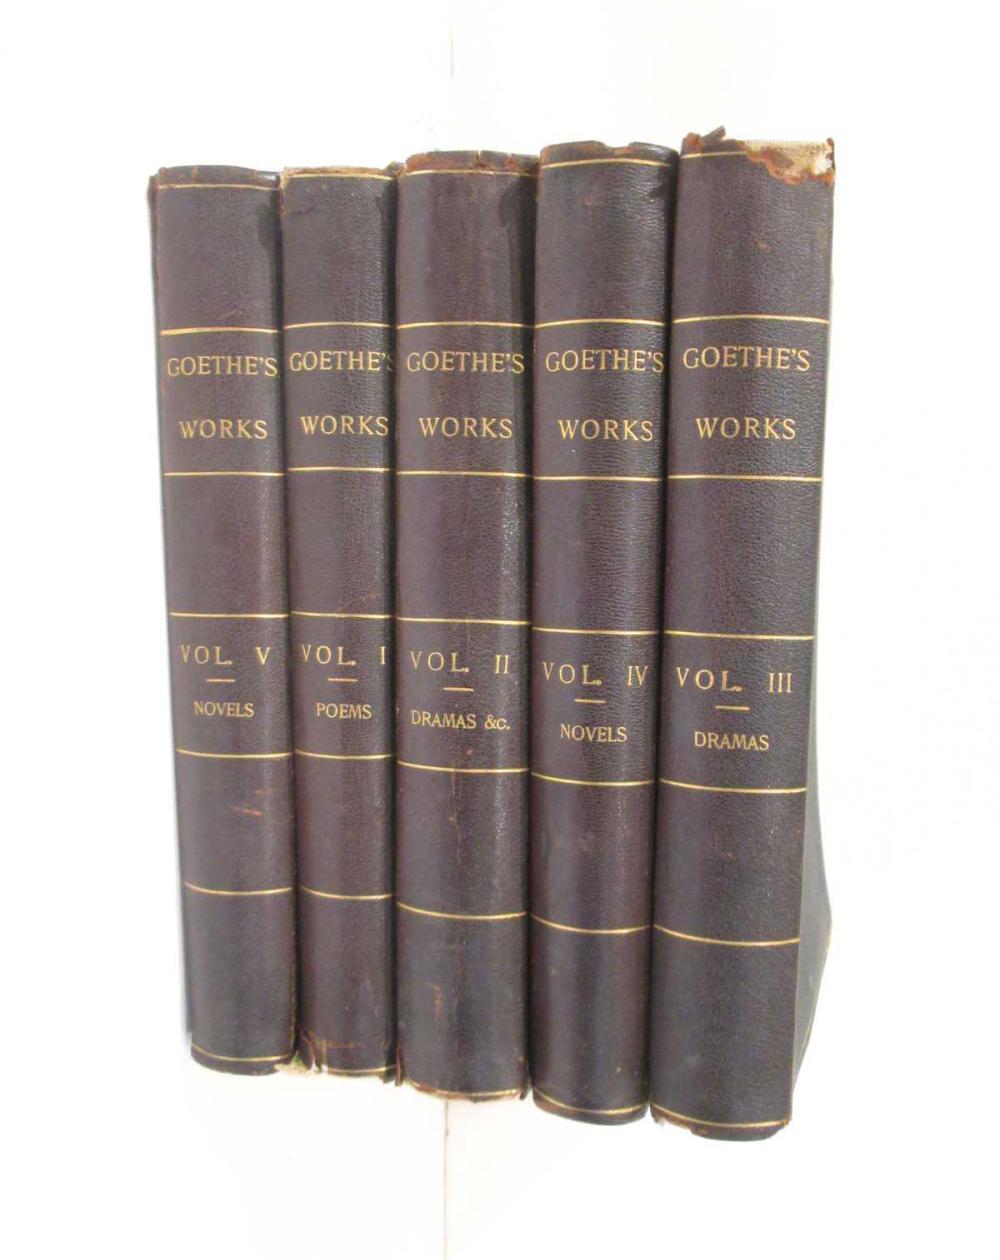 COLLECTIBLE BOOKS GOETHE S WORKS  315731